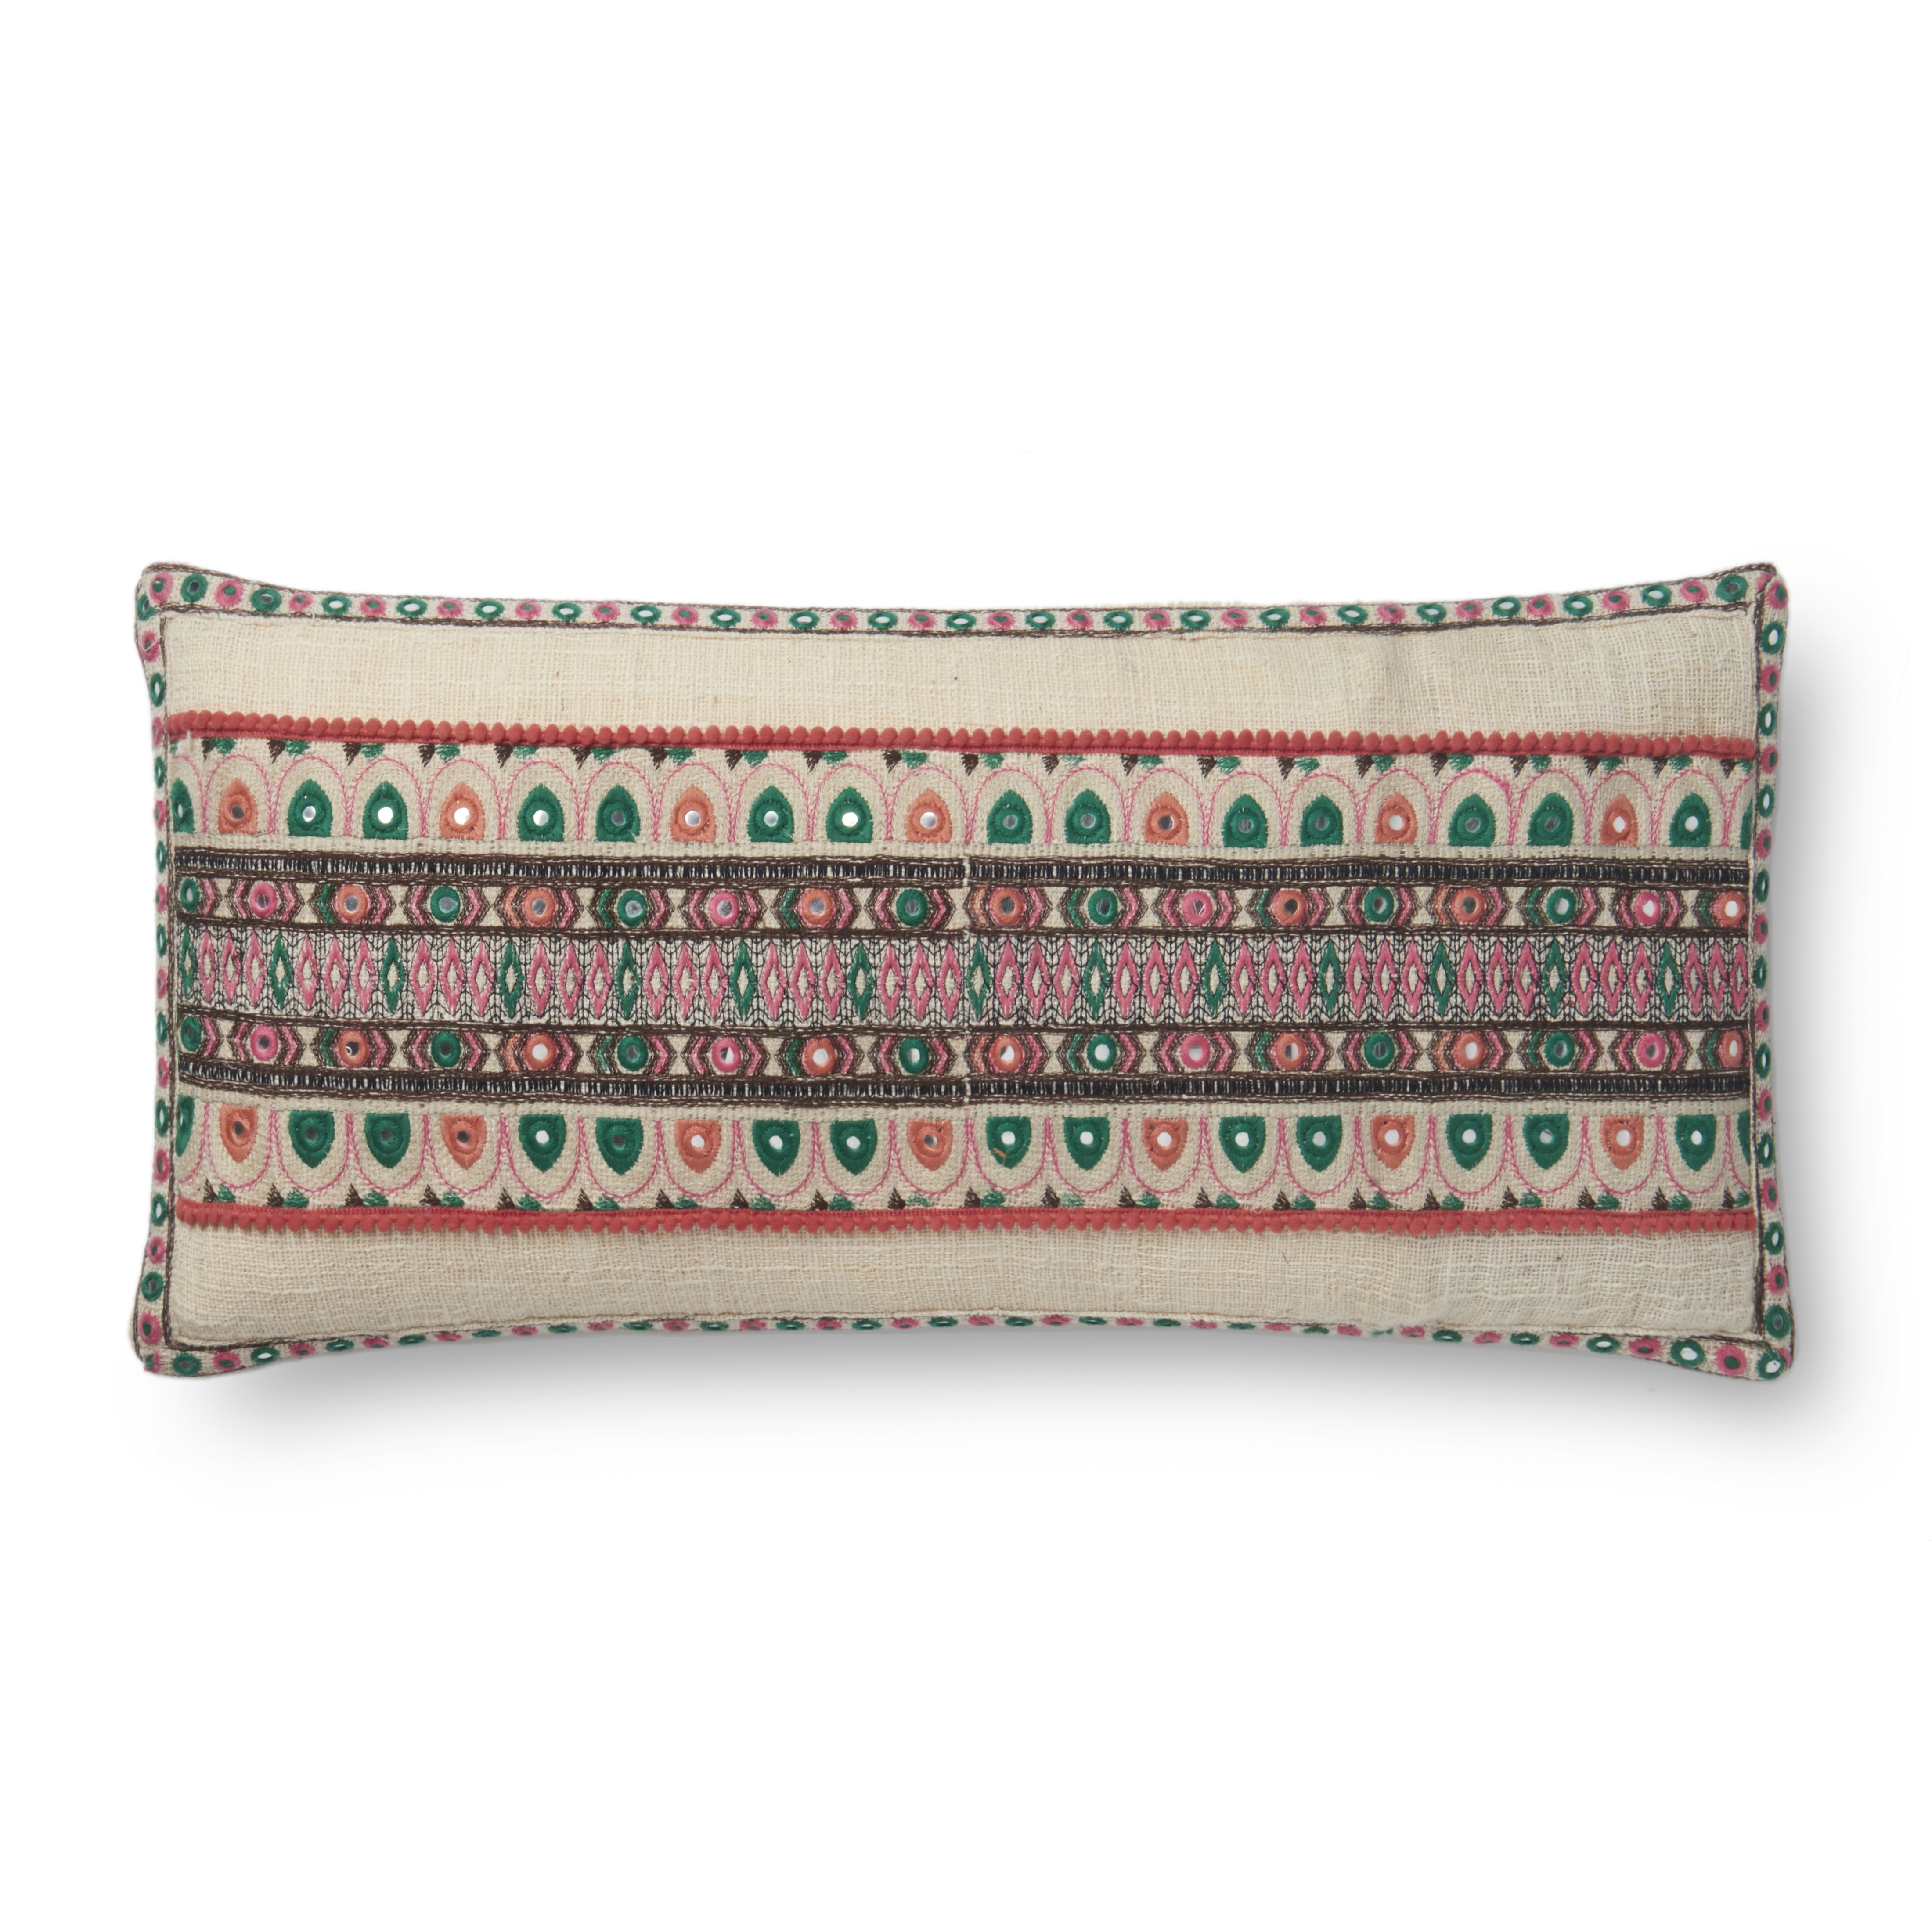 Justina Blakeney x Loloi Pillows P0634 Multi 13" x 35" Cover Only - Image 0